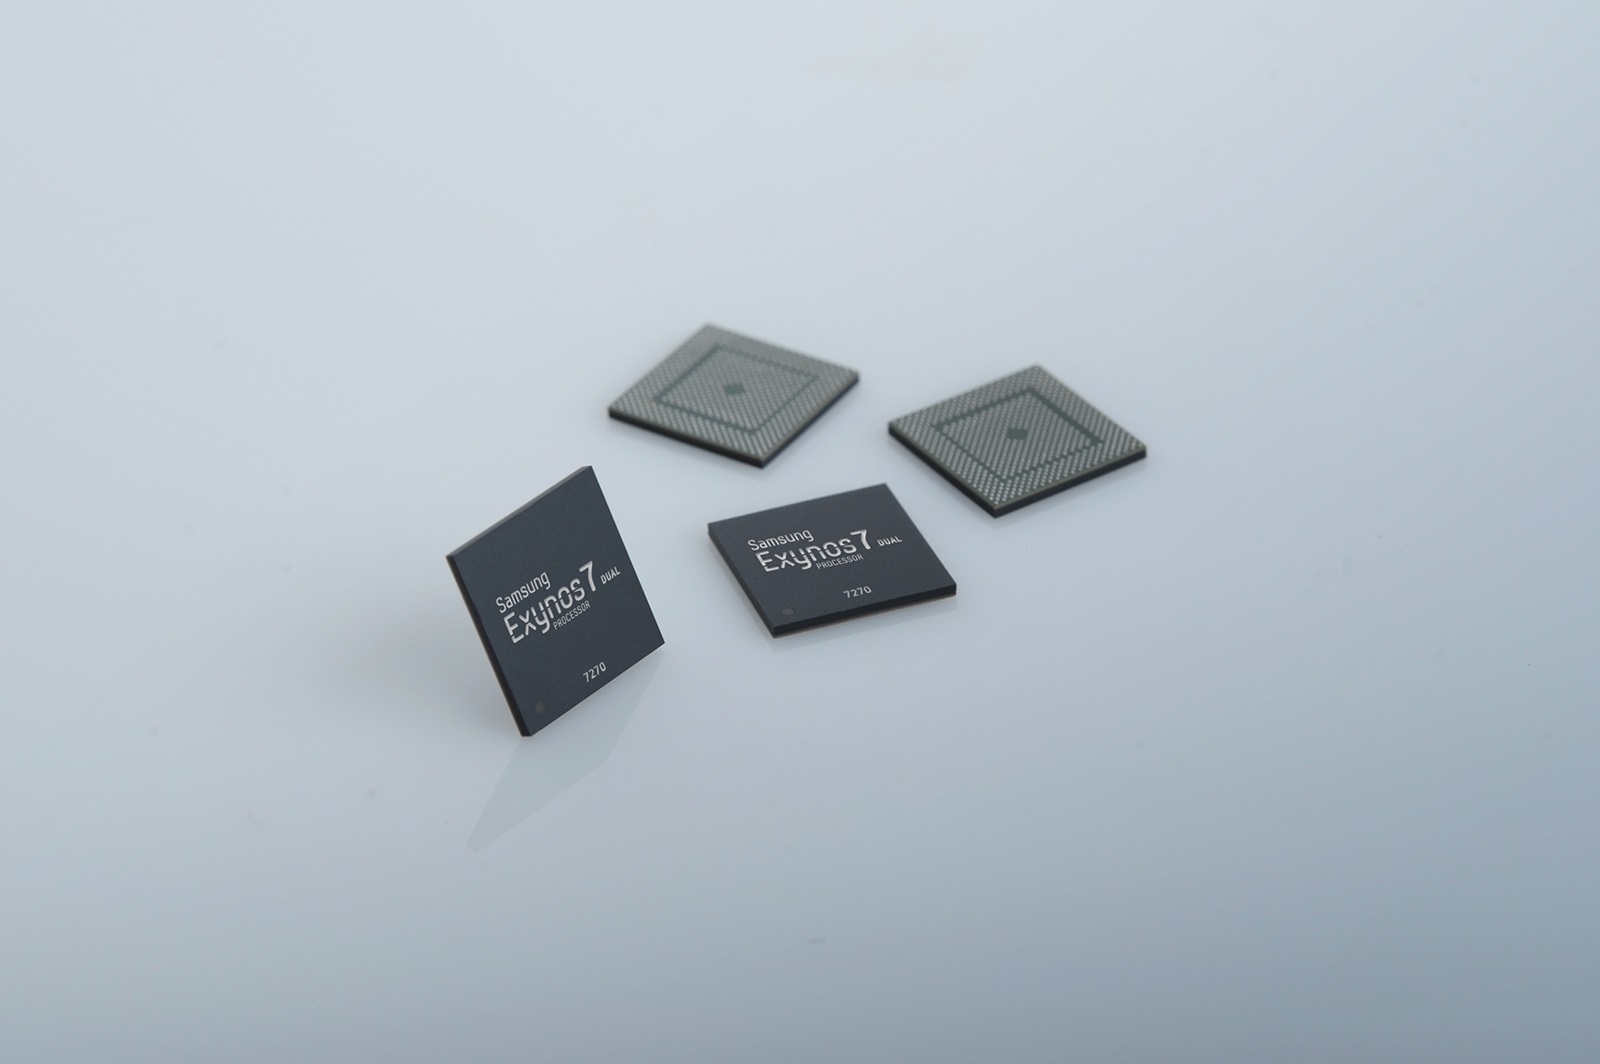 Samsung Mass Produces Industry's First Application Processor for Wearable Devices Built on 14-Nanometer FinFET Technology_1